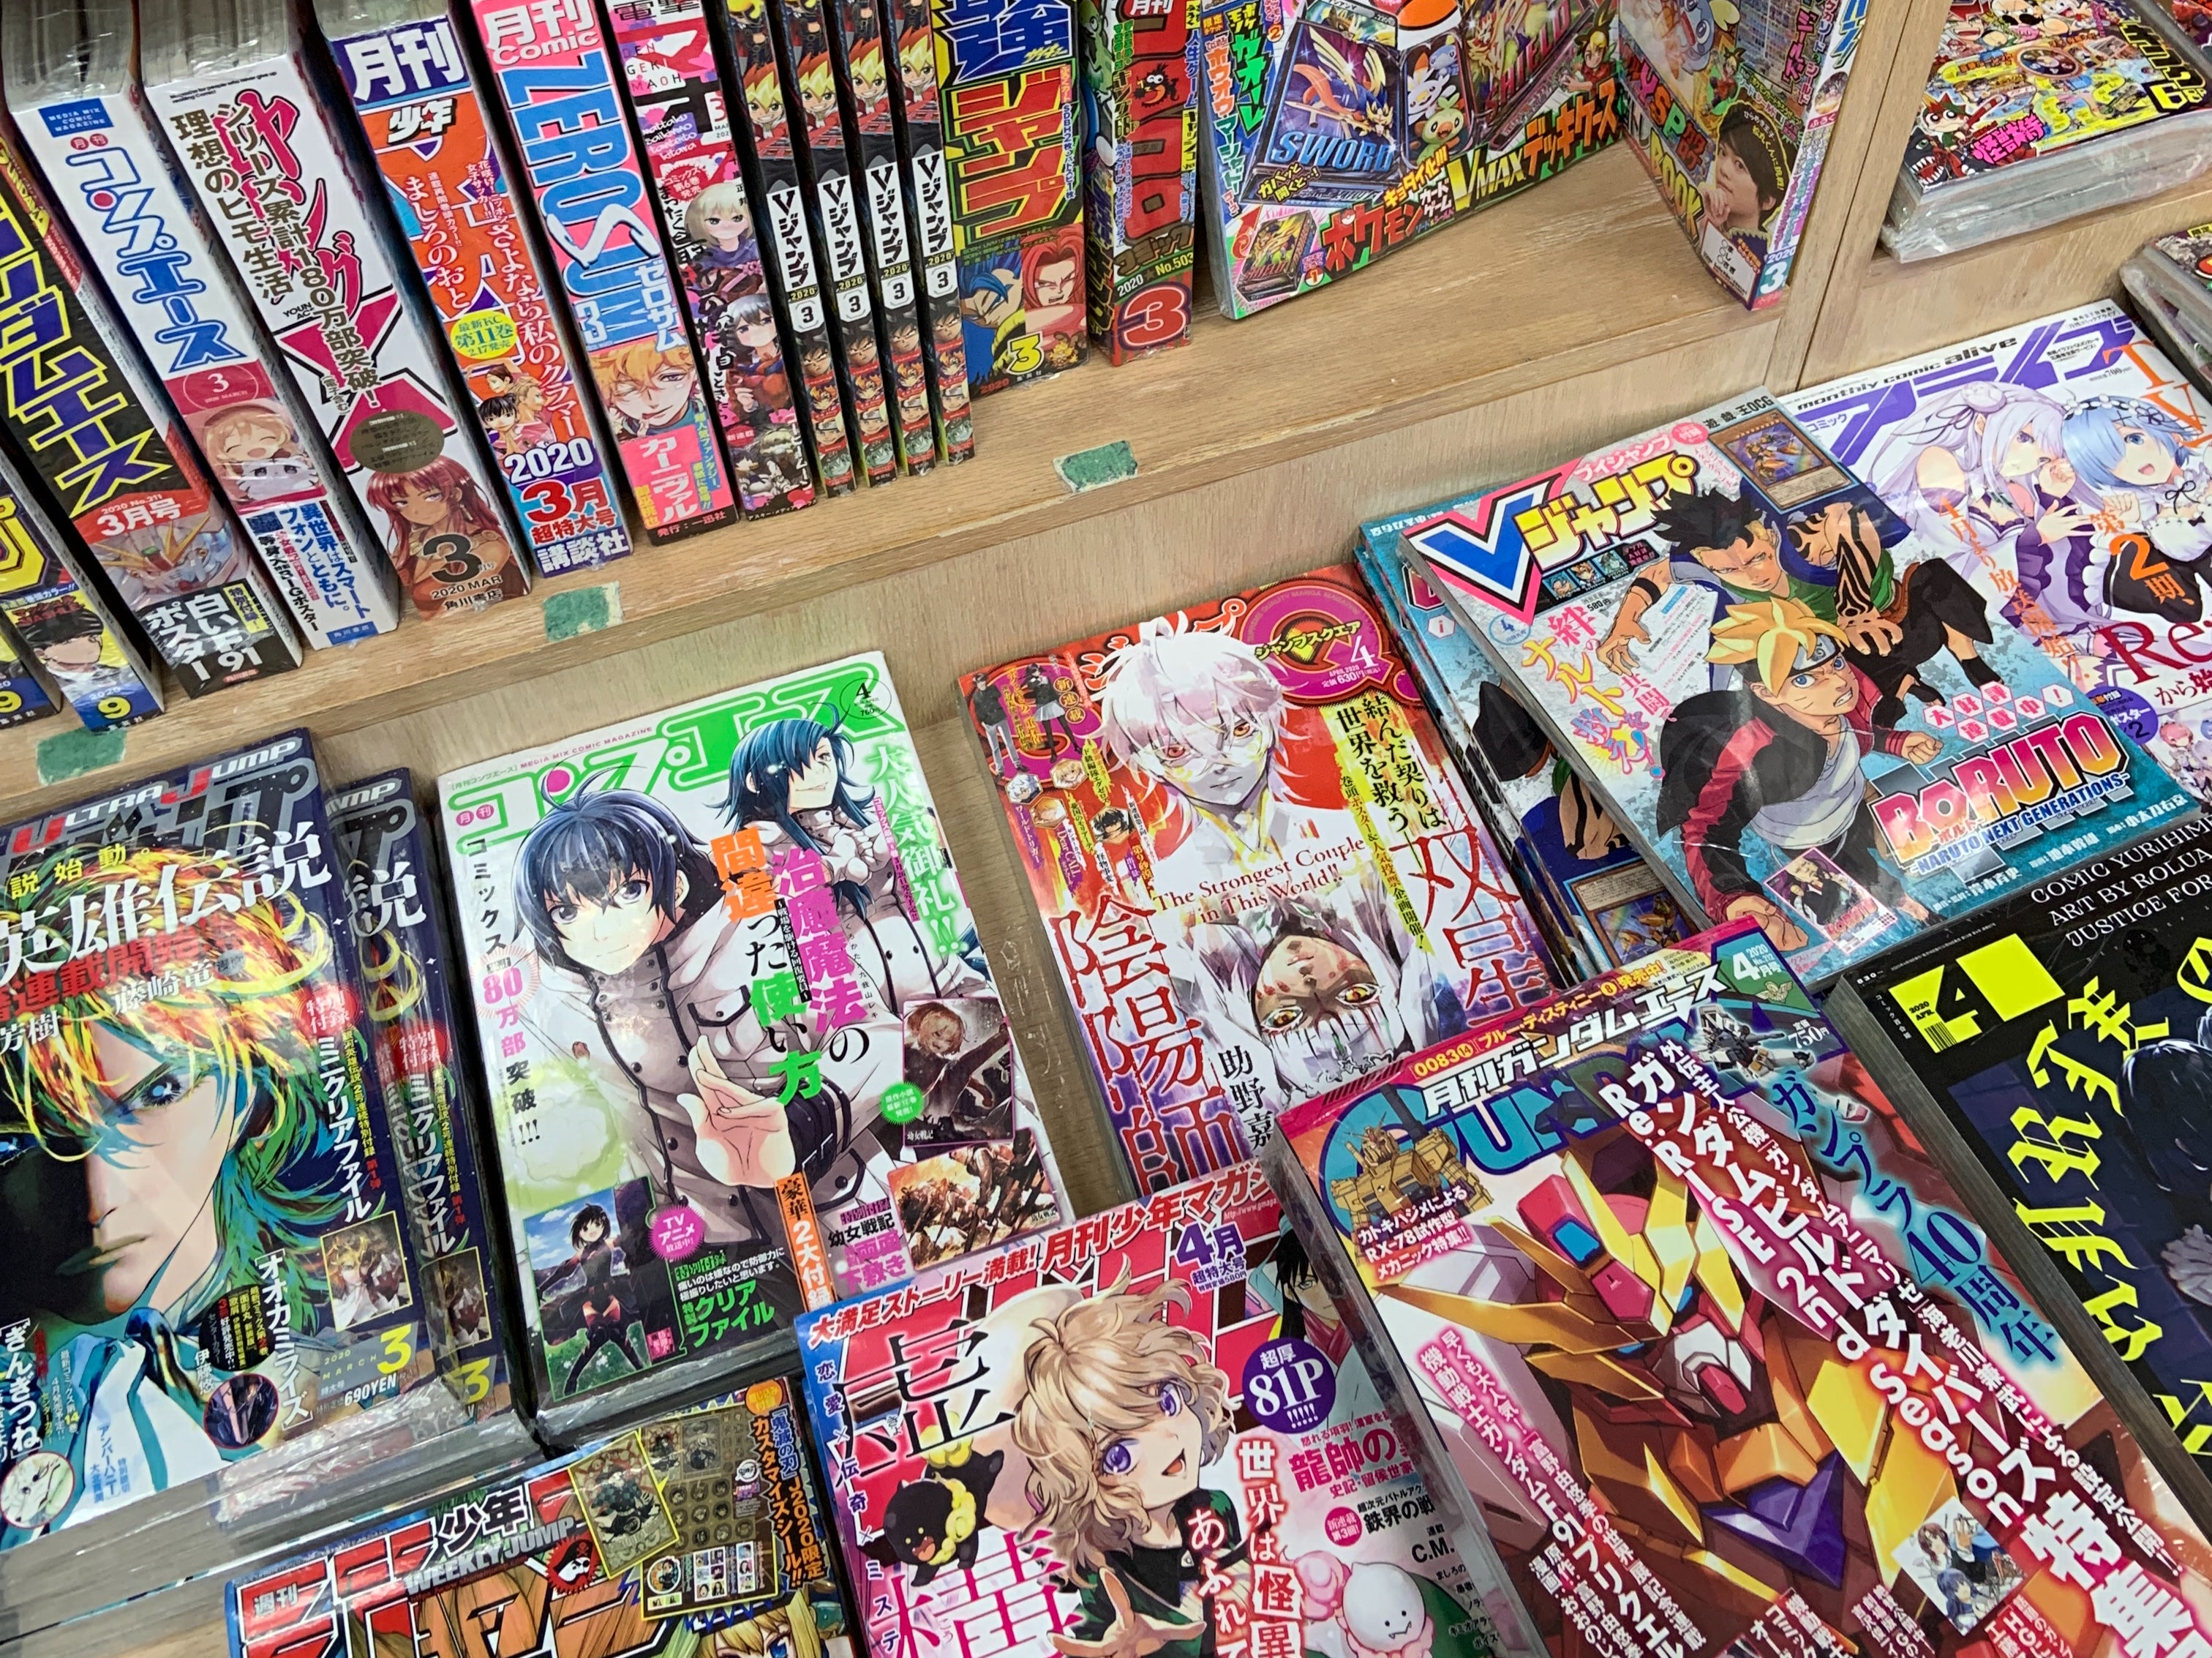 Kinokuniya Bookstore is a must-visit for lovers of manga and anime